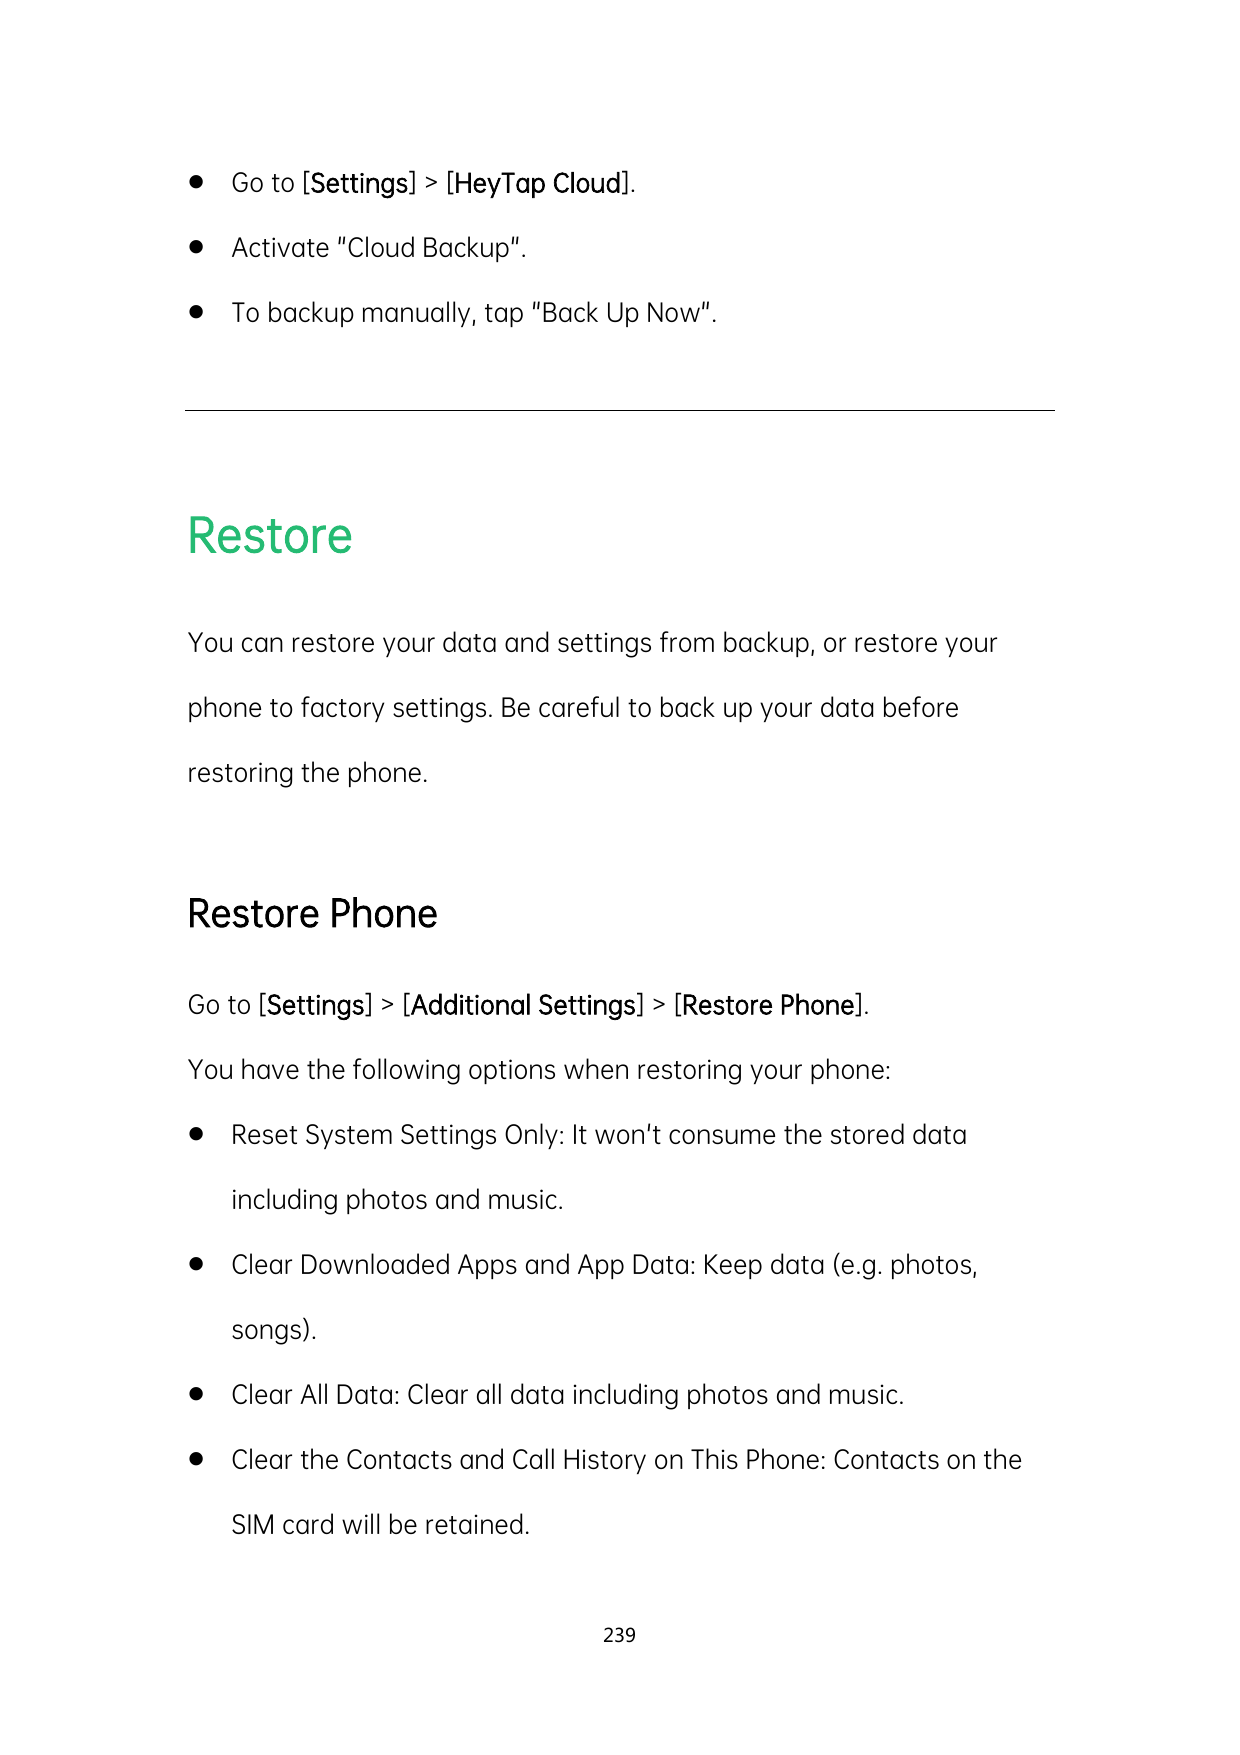 Go to [Settings] > [HeyTap Cloud].Activate "Cloud Backup".To backup manually, tap "Back Up Now".RestoreYou can restore your d